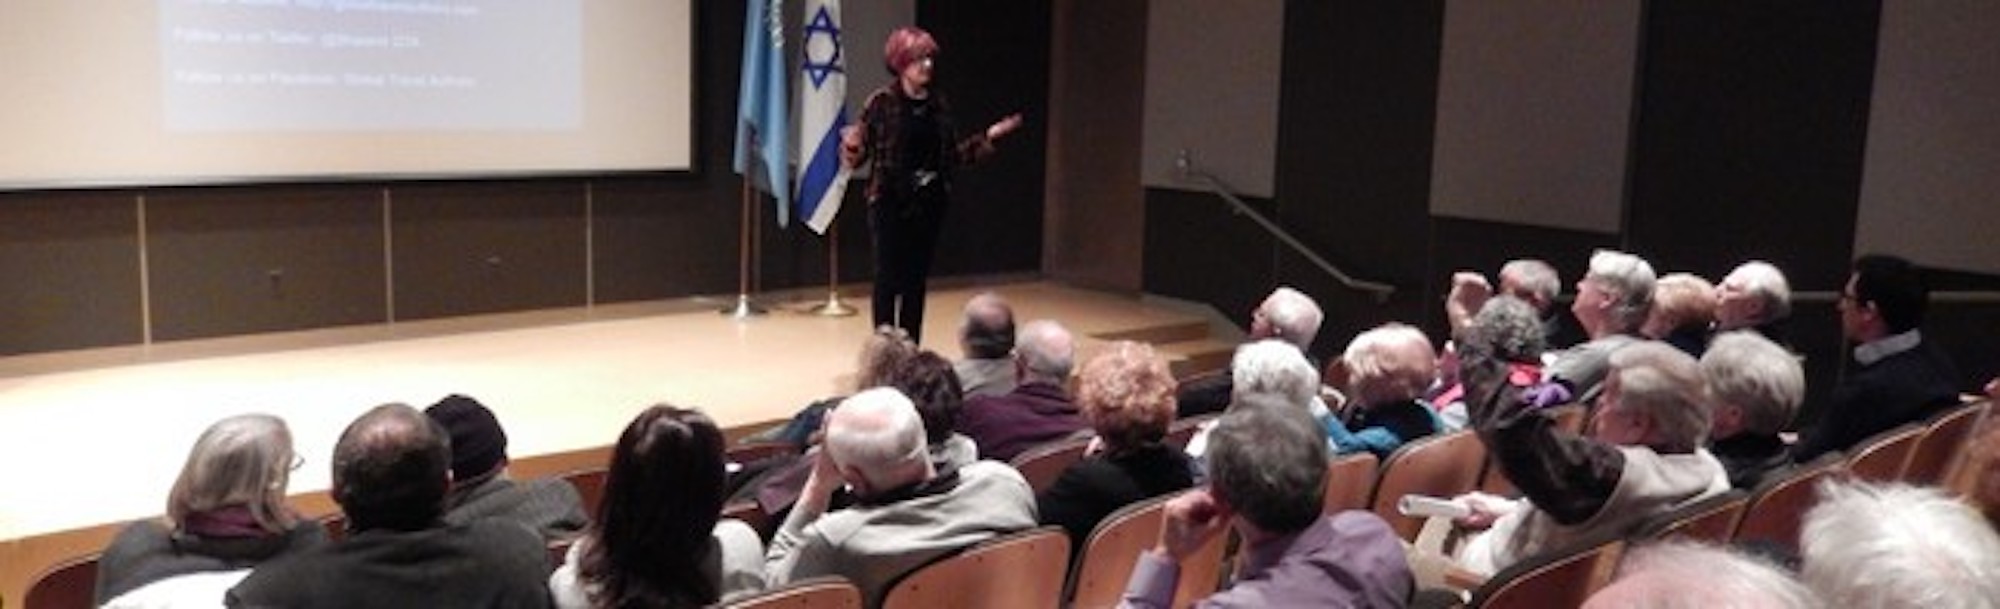 Irene Shaland presenting a lecture at the Maltz Museum of Jewish Heritage